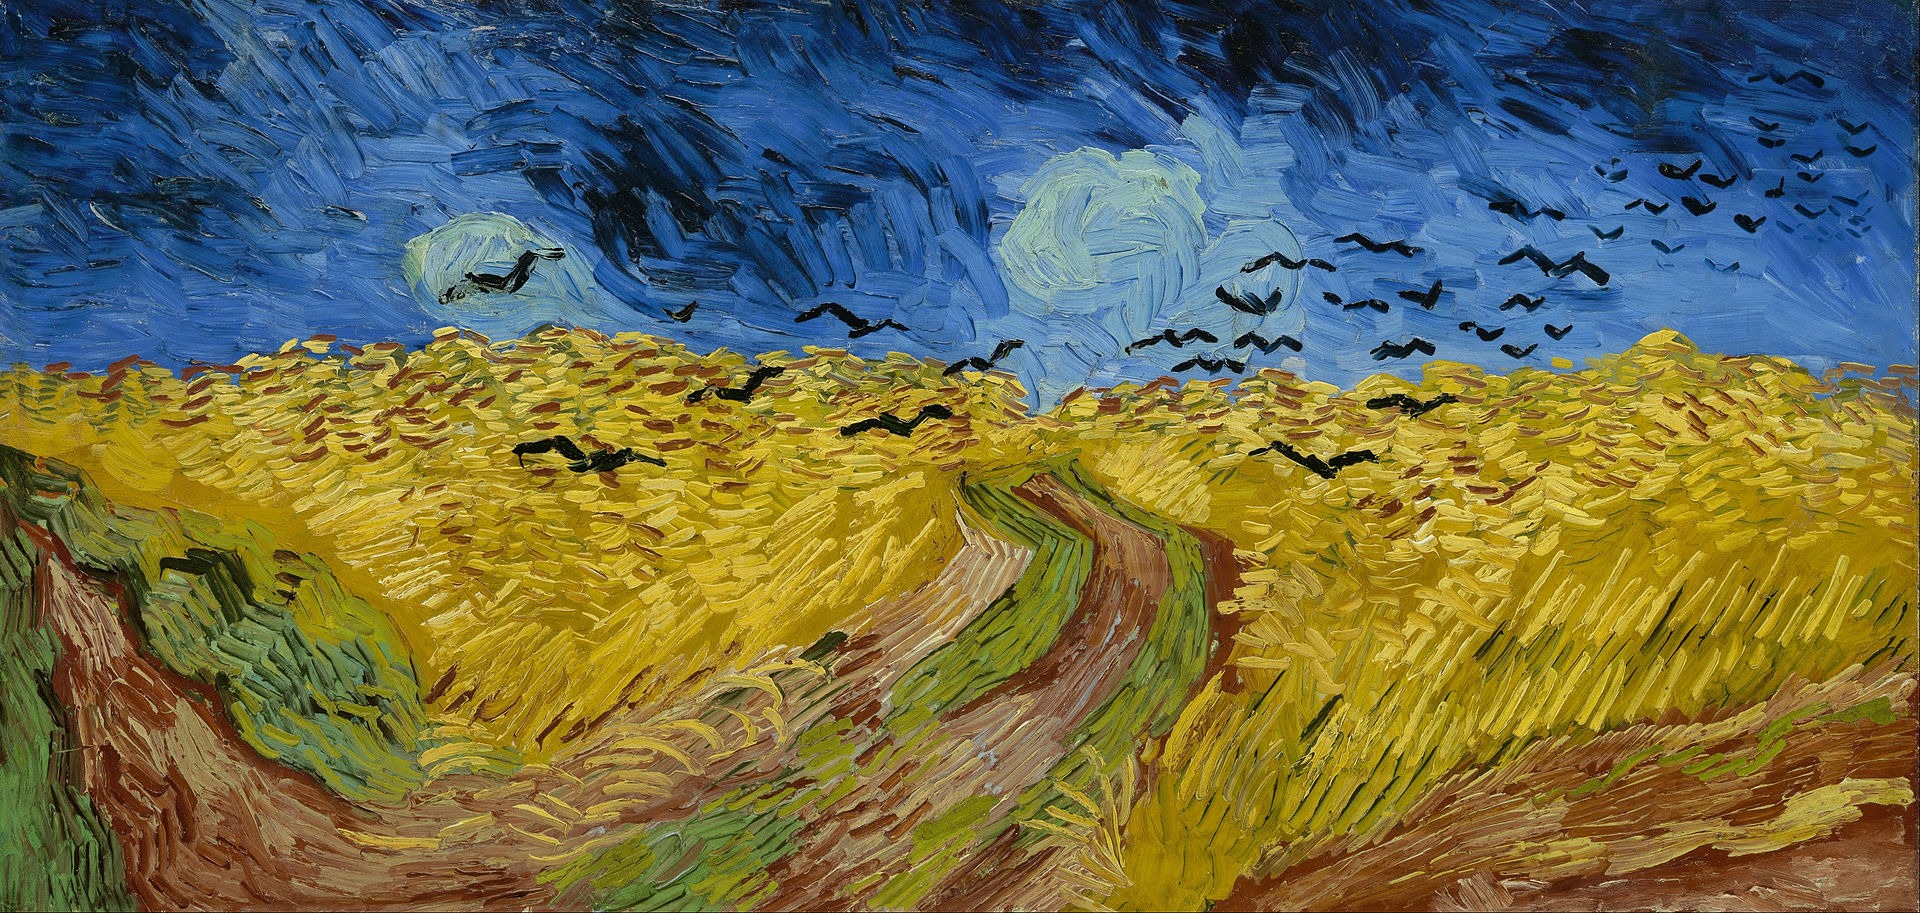 Van Gogh's Painting Style and Technique